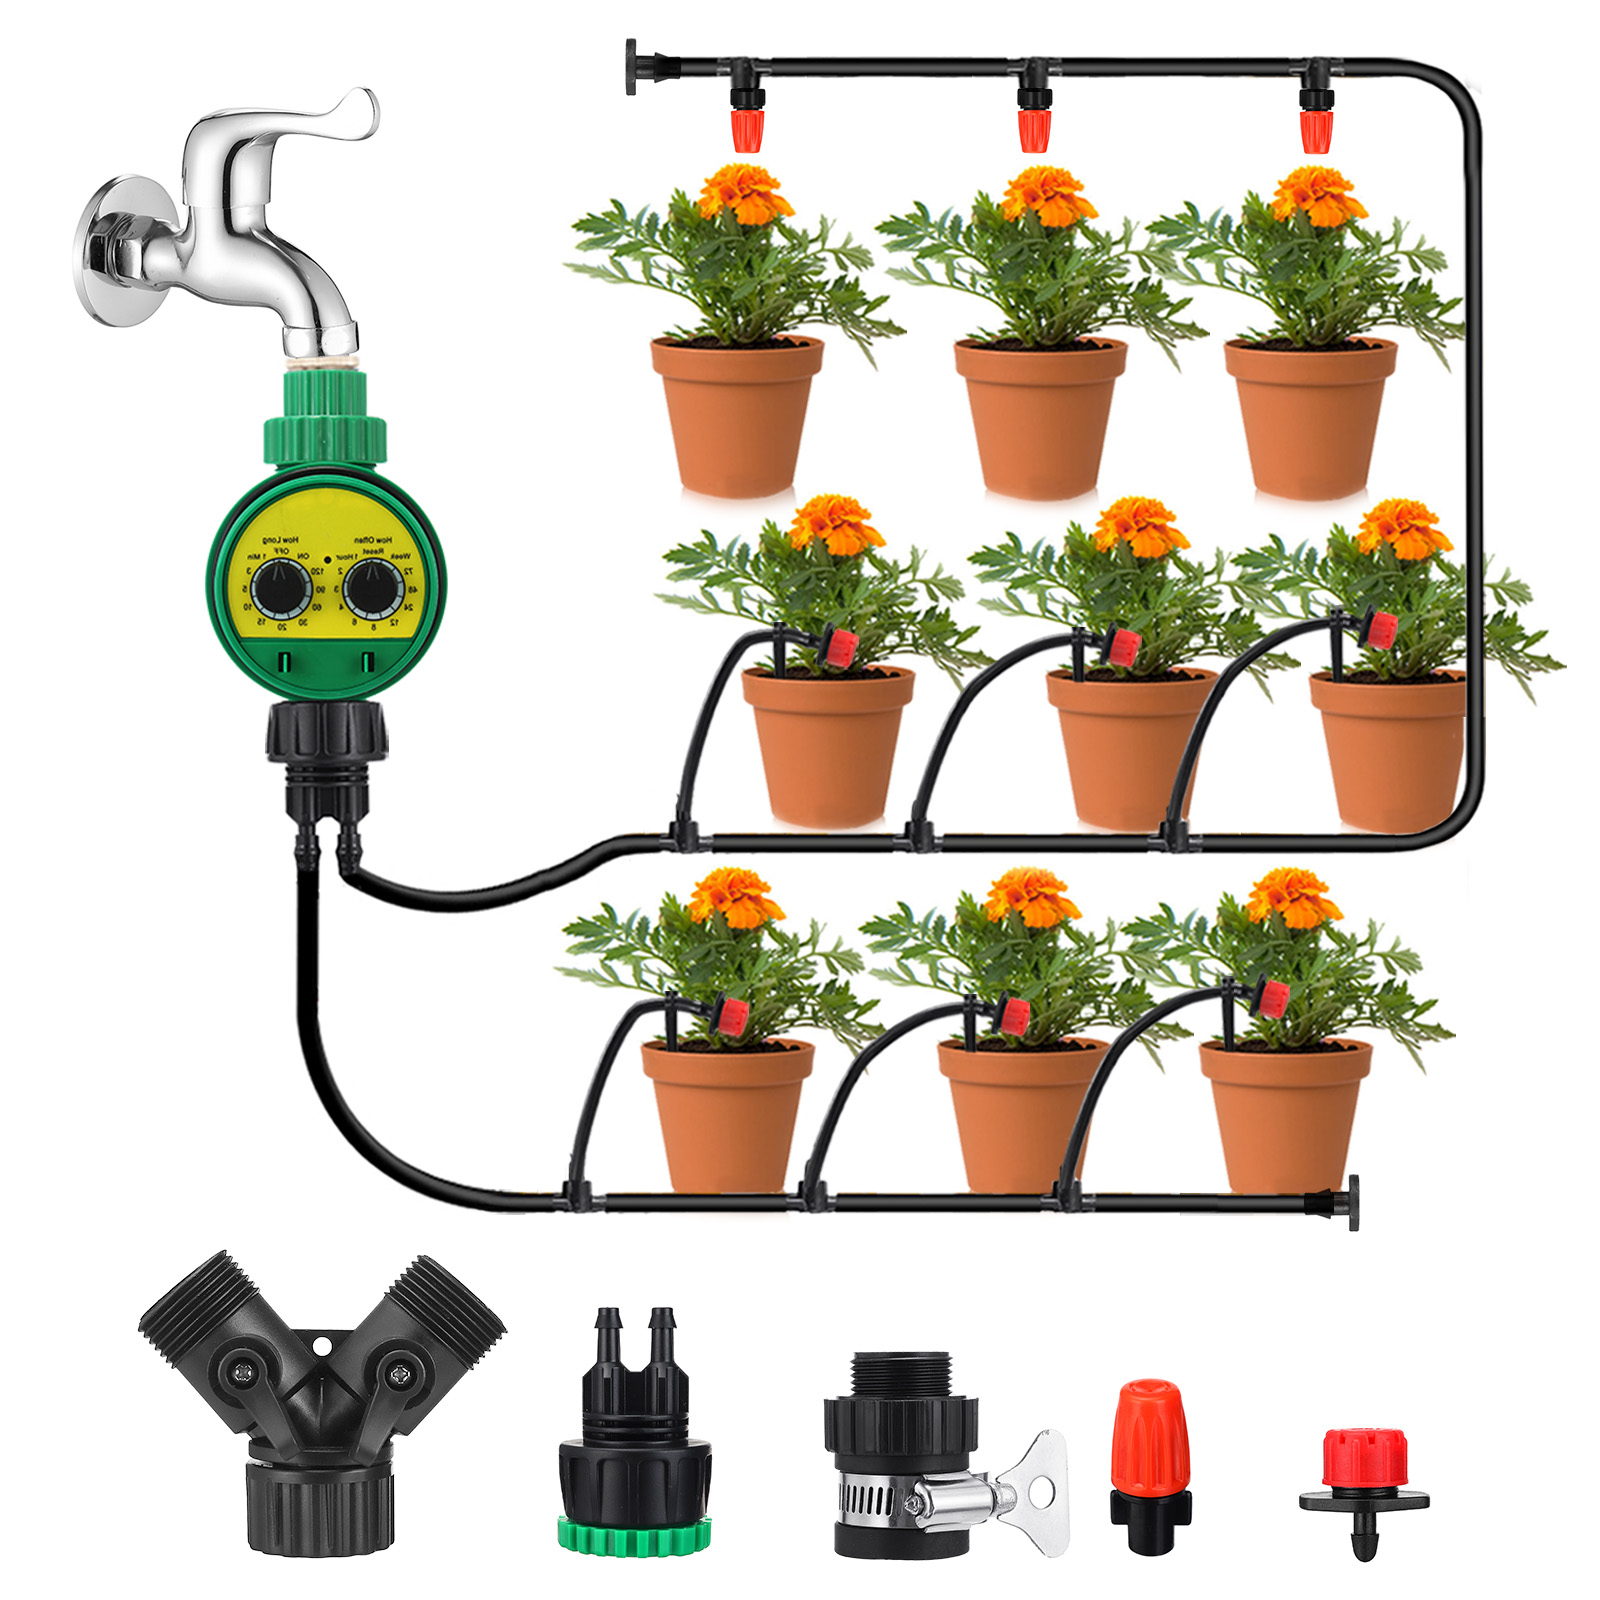 KING-DO-WAY-Drip-Irrigation-Kit-with-Water-Timer-Water-Pipe-and-Full-Language-Manual-and-Other-Acces-1829777-8